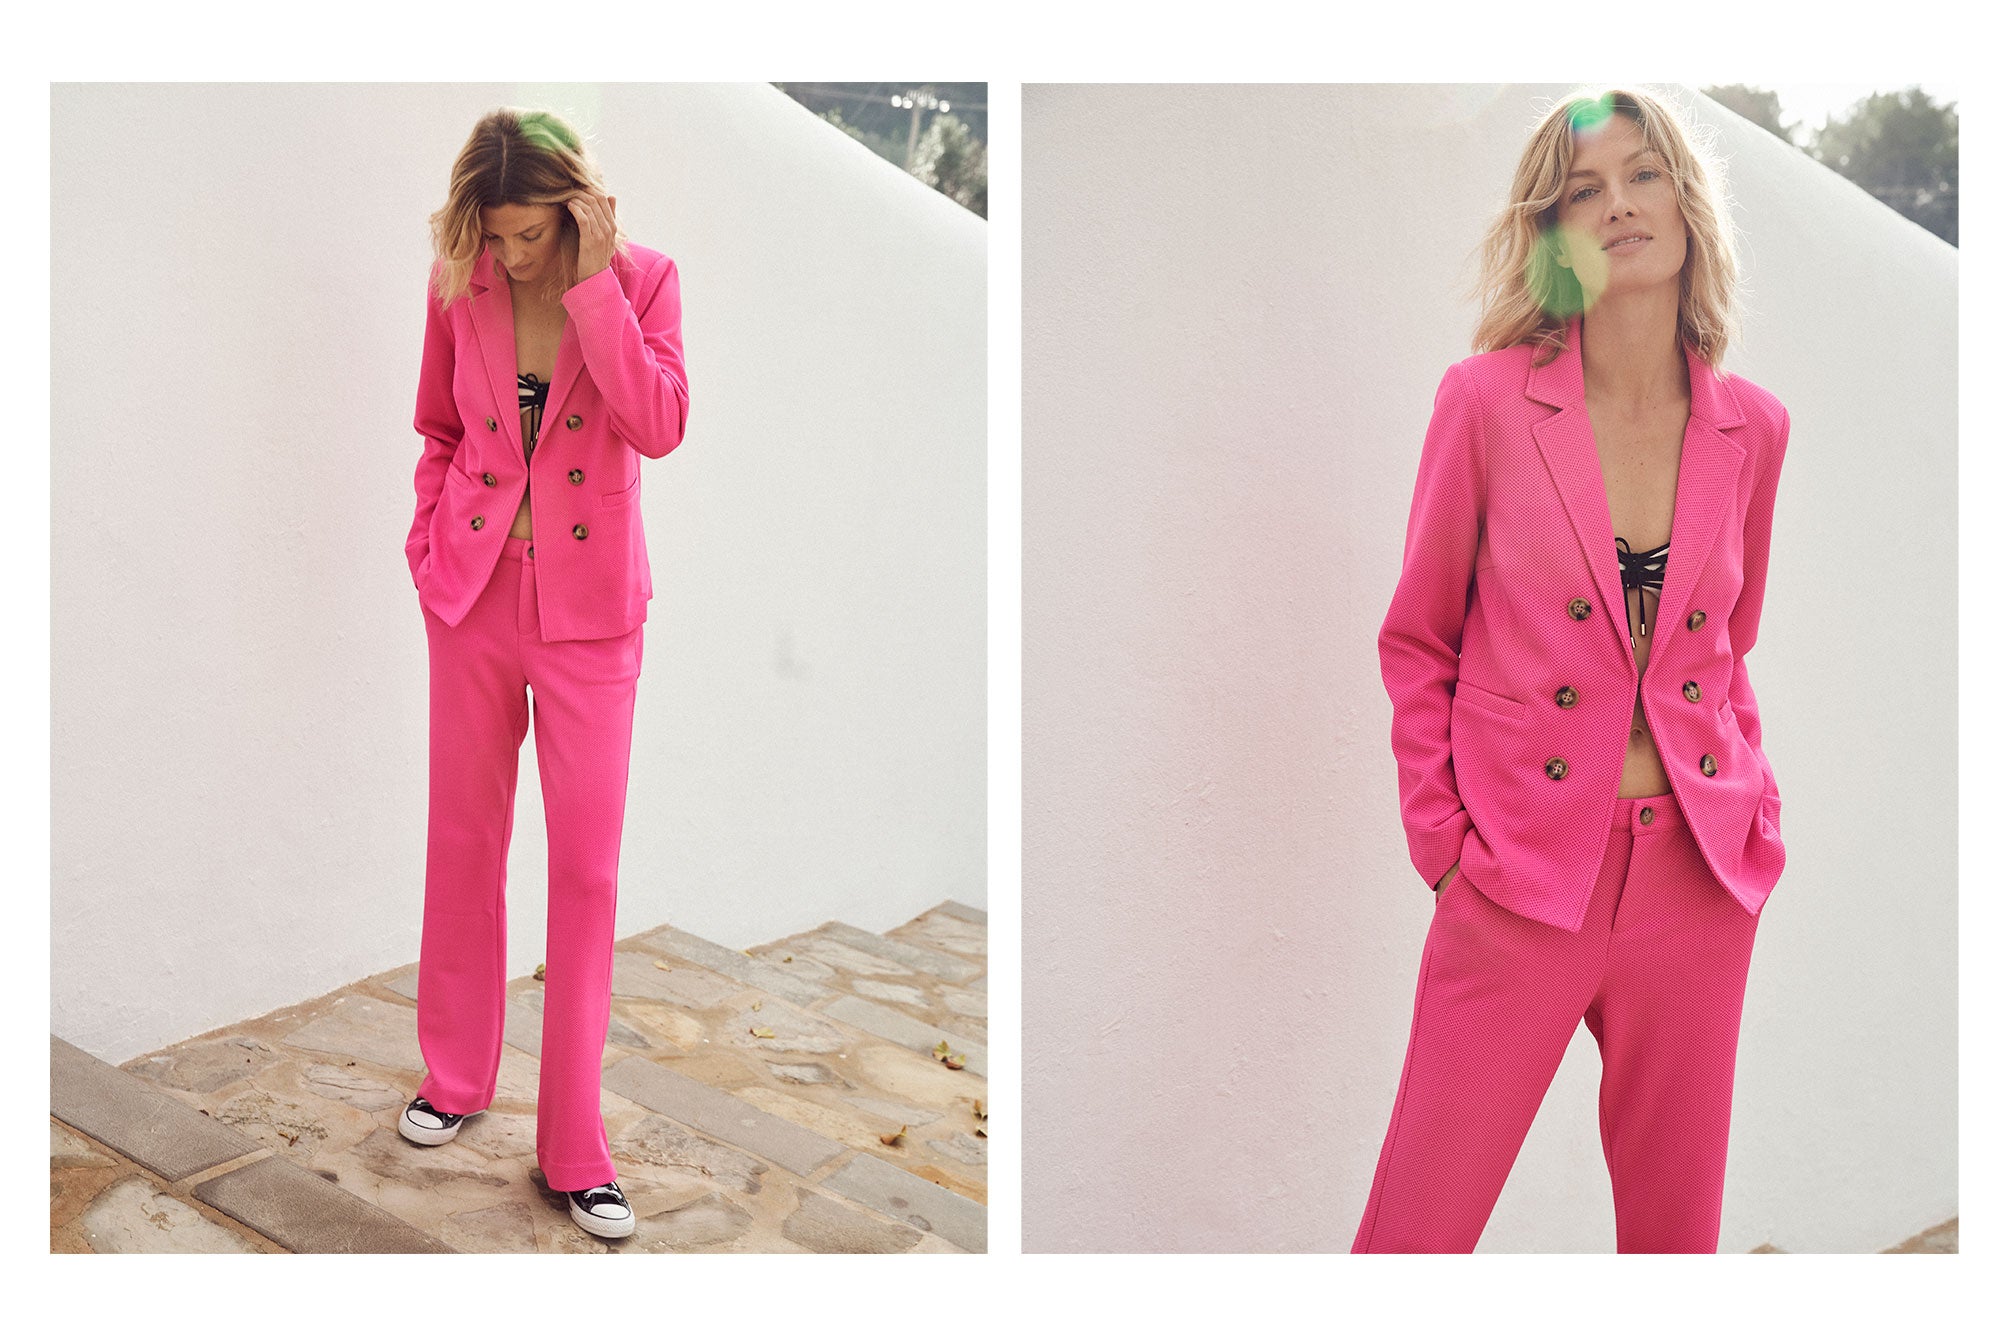 Pretty in pink! Discover all the possibilities with the trend of – POM Amsterdam